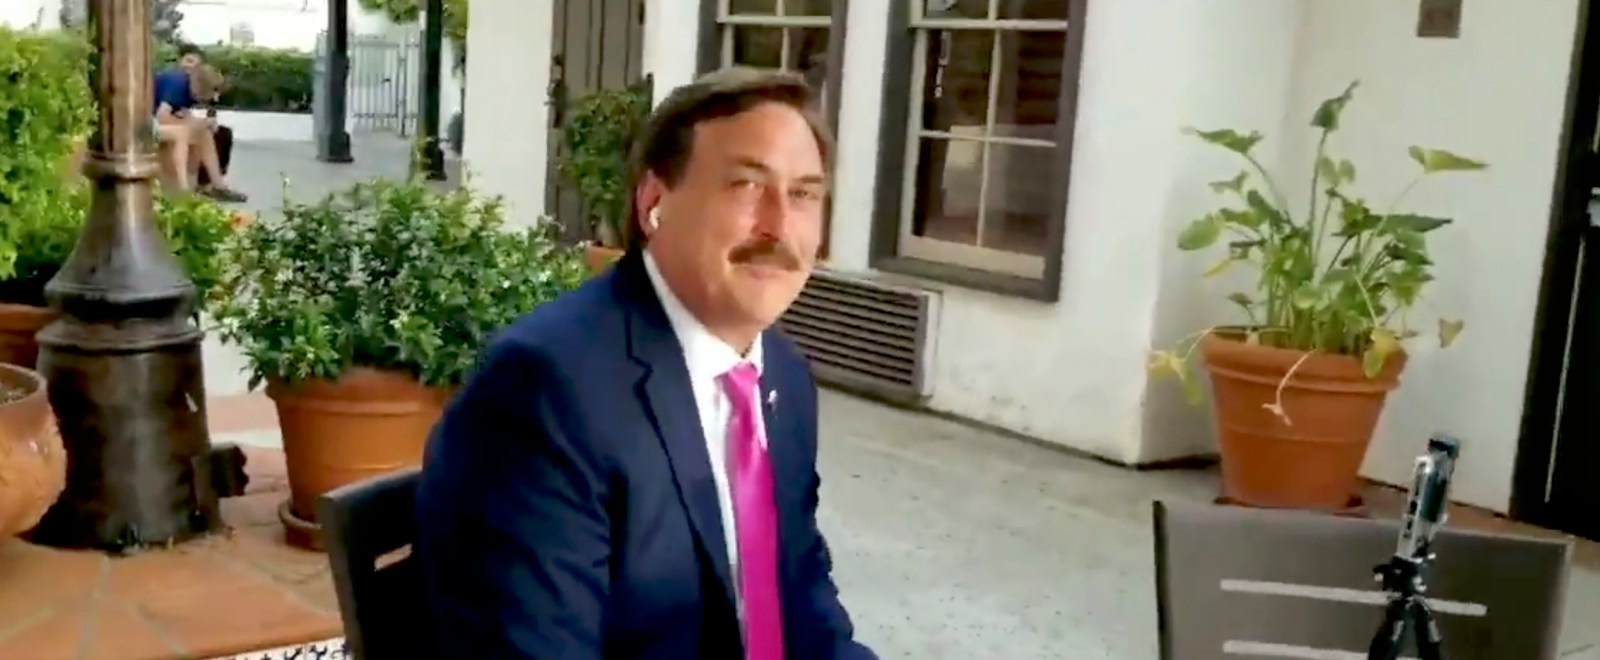 Mike Lindell Got Trolled During A Bizarre Live Interview